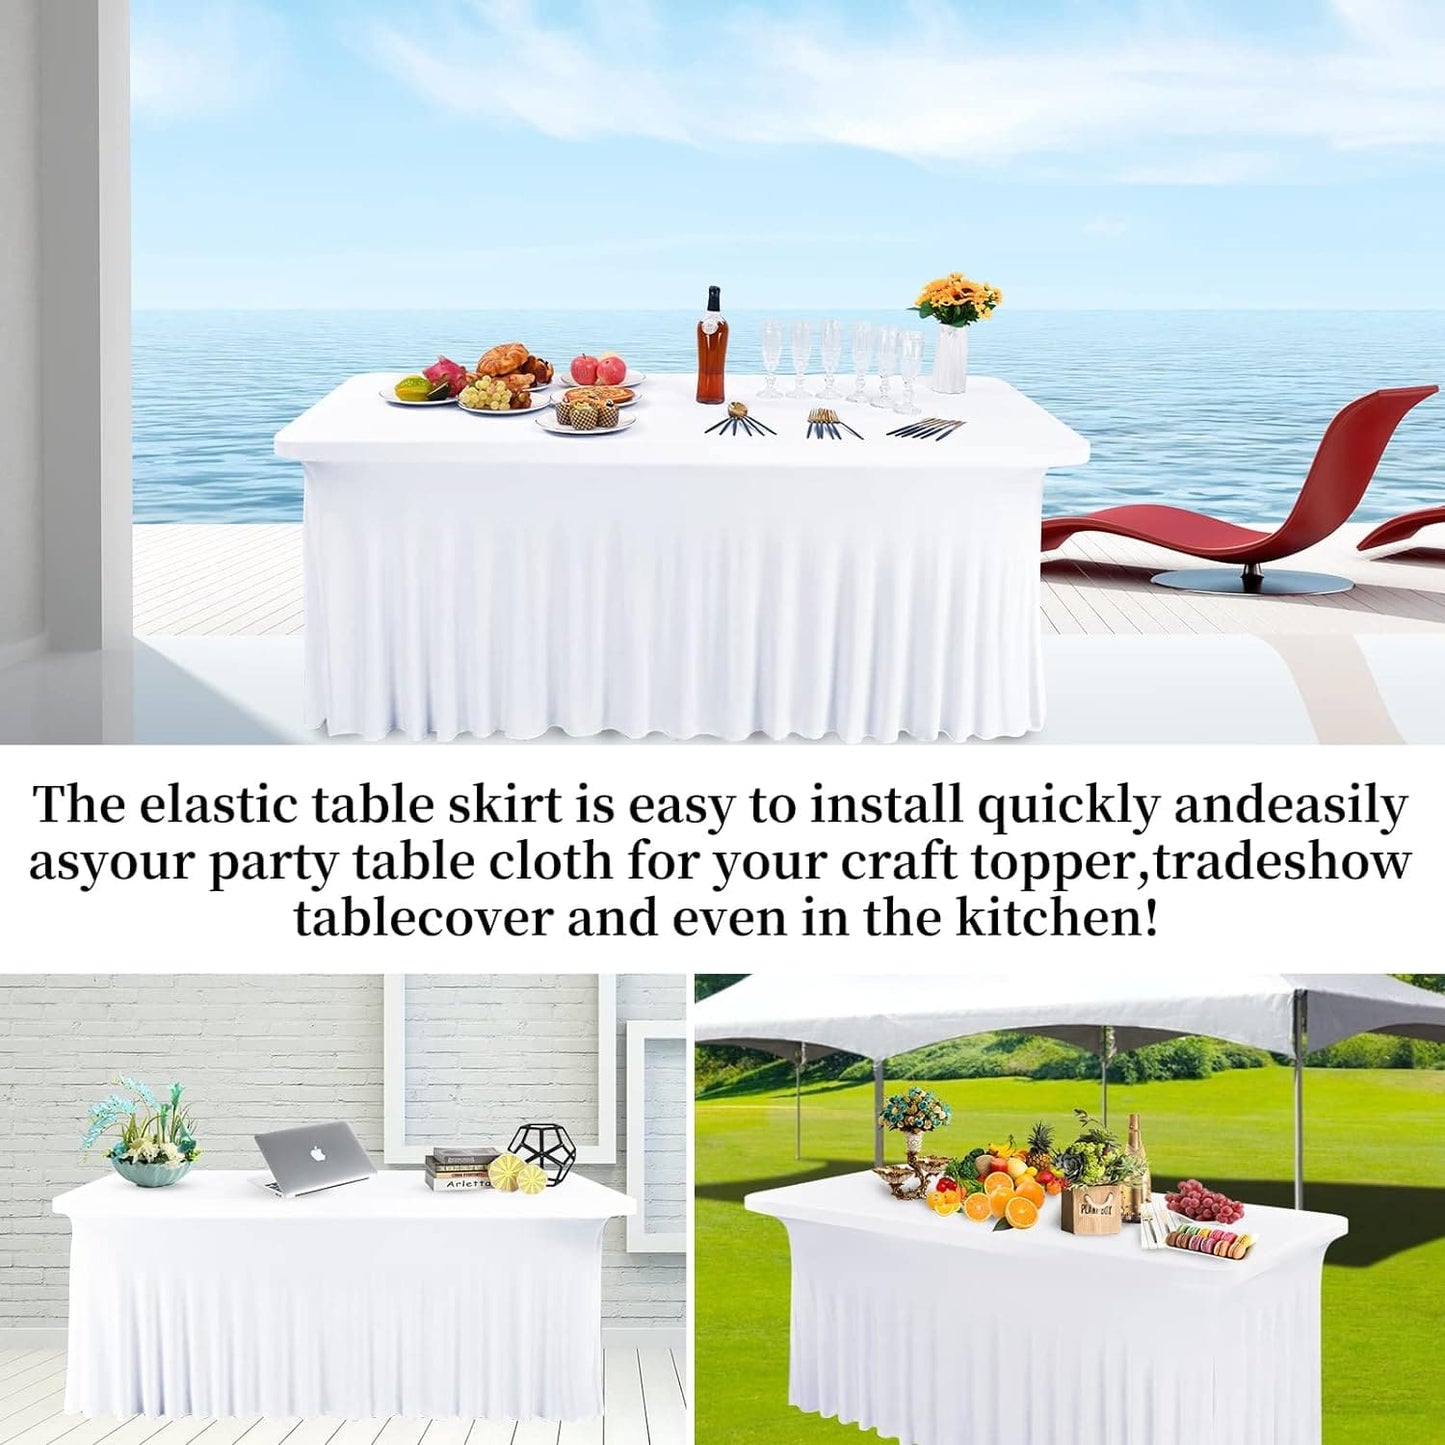 6FT/8FT CKDLINS Spandex Table Skirt Fitted White Stretch Tablecloth,One-Piece Wrinkle-Resistant Ruffles Design Installs in Seconds,Perfect for Rectangle Tables Banquets Parties Wedding Thanksgiving